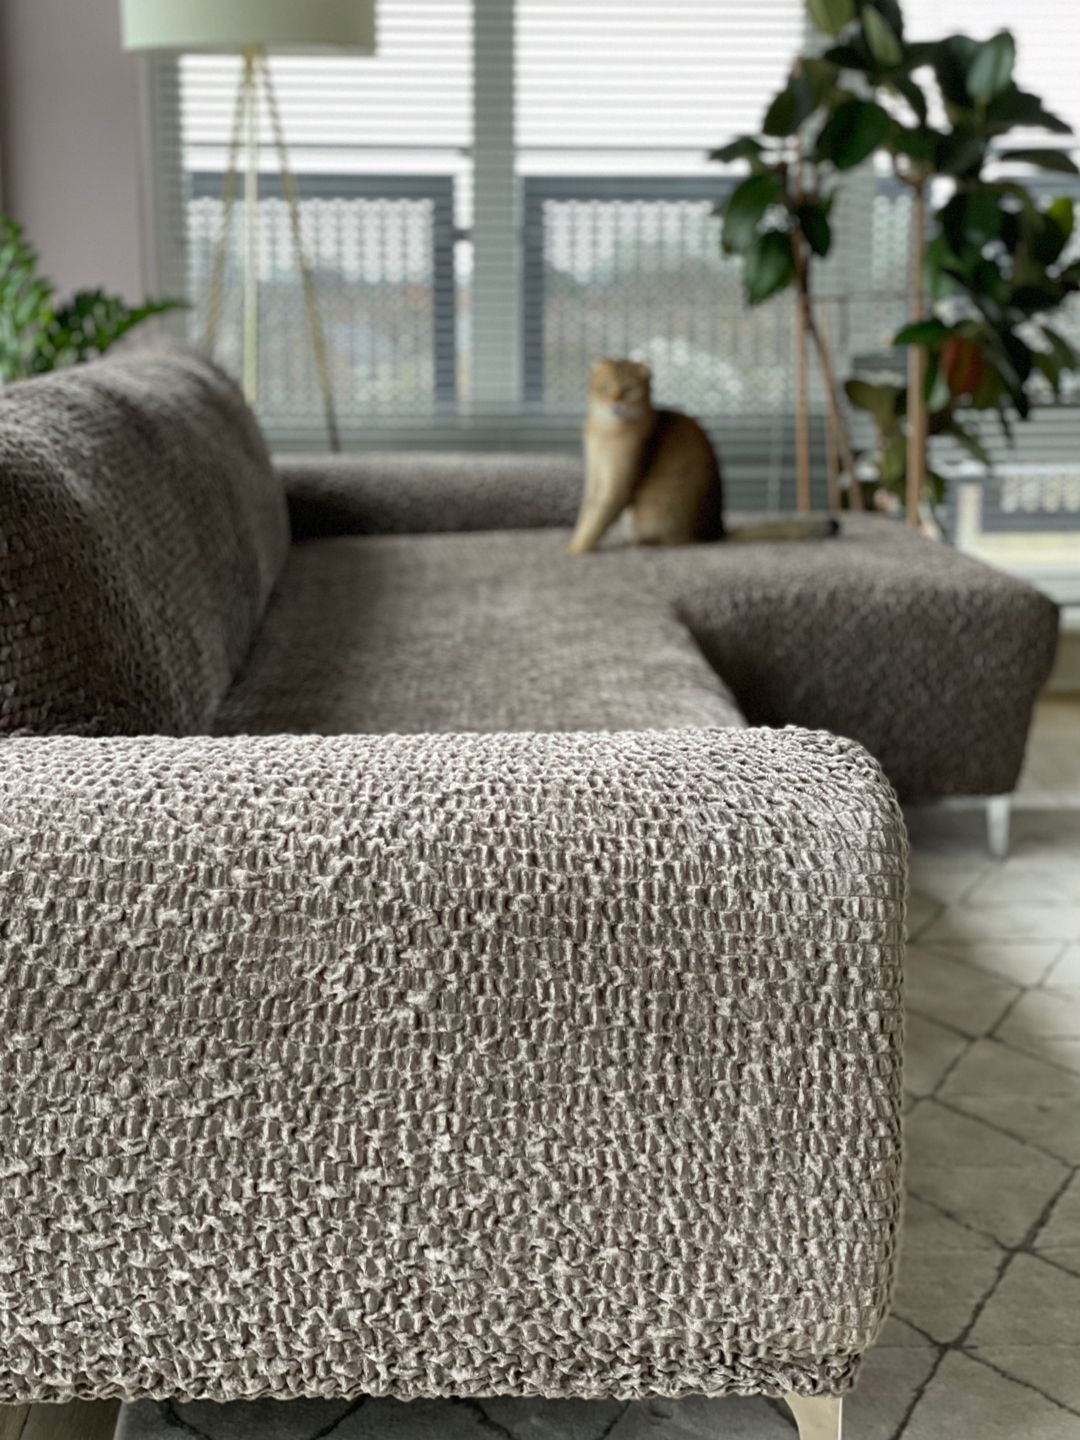 Microfiber Material for An Easy Cleaning Sofa